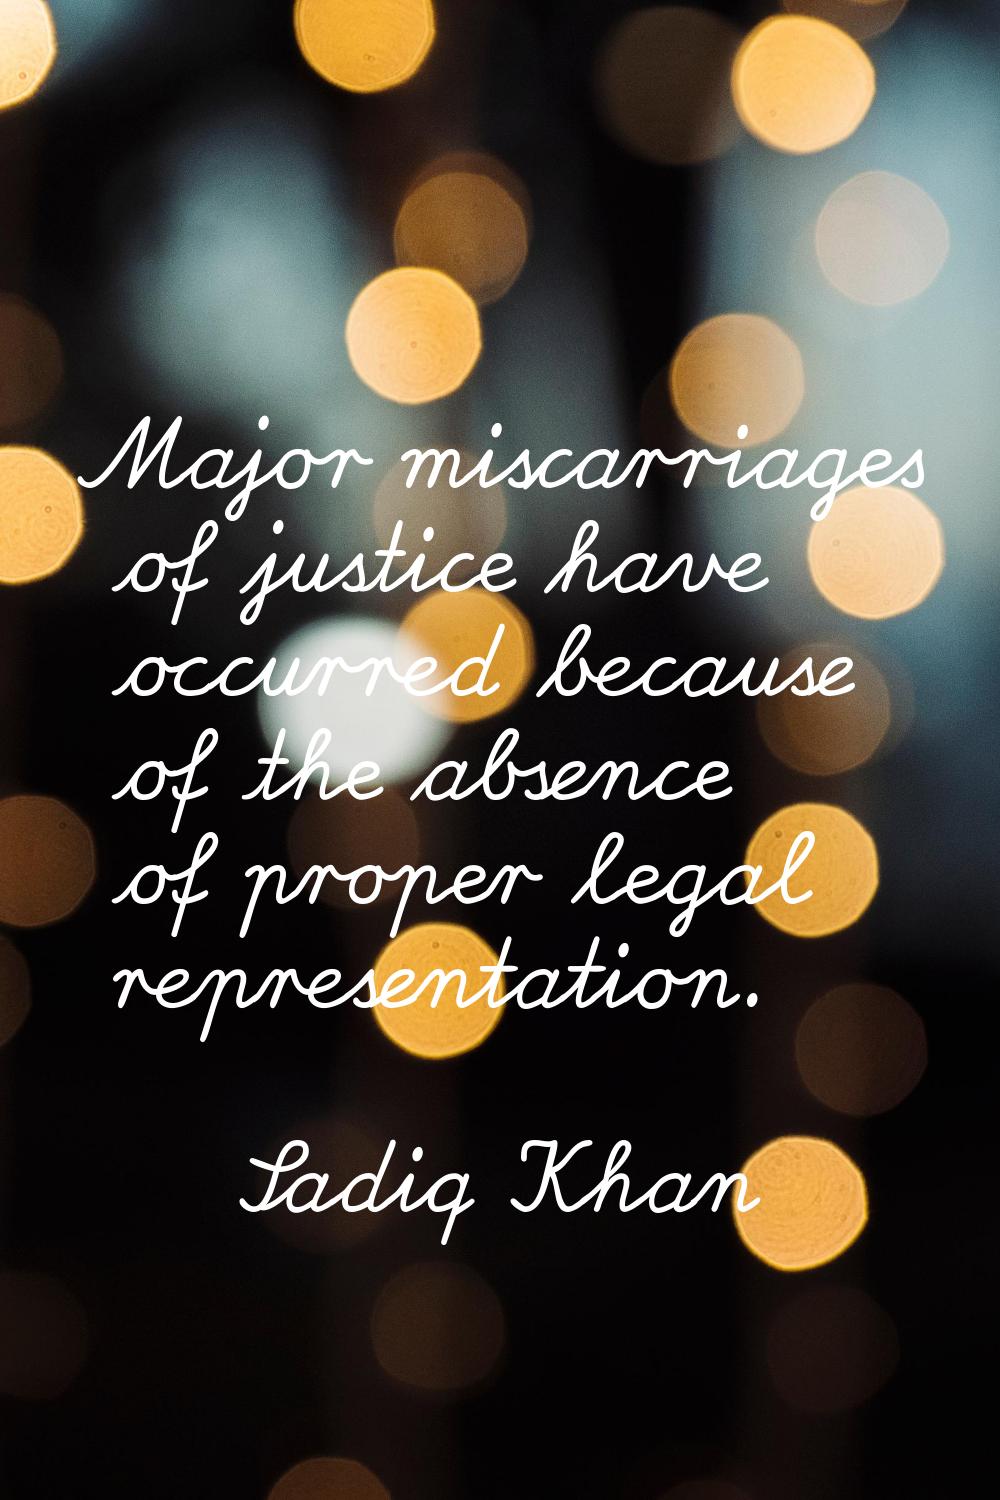 Major miscarriages of justice have occurred because of the absence of proper legal representation.